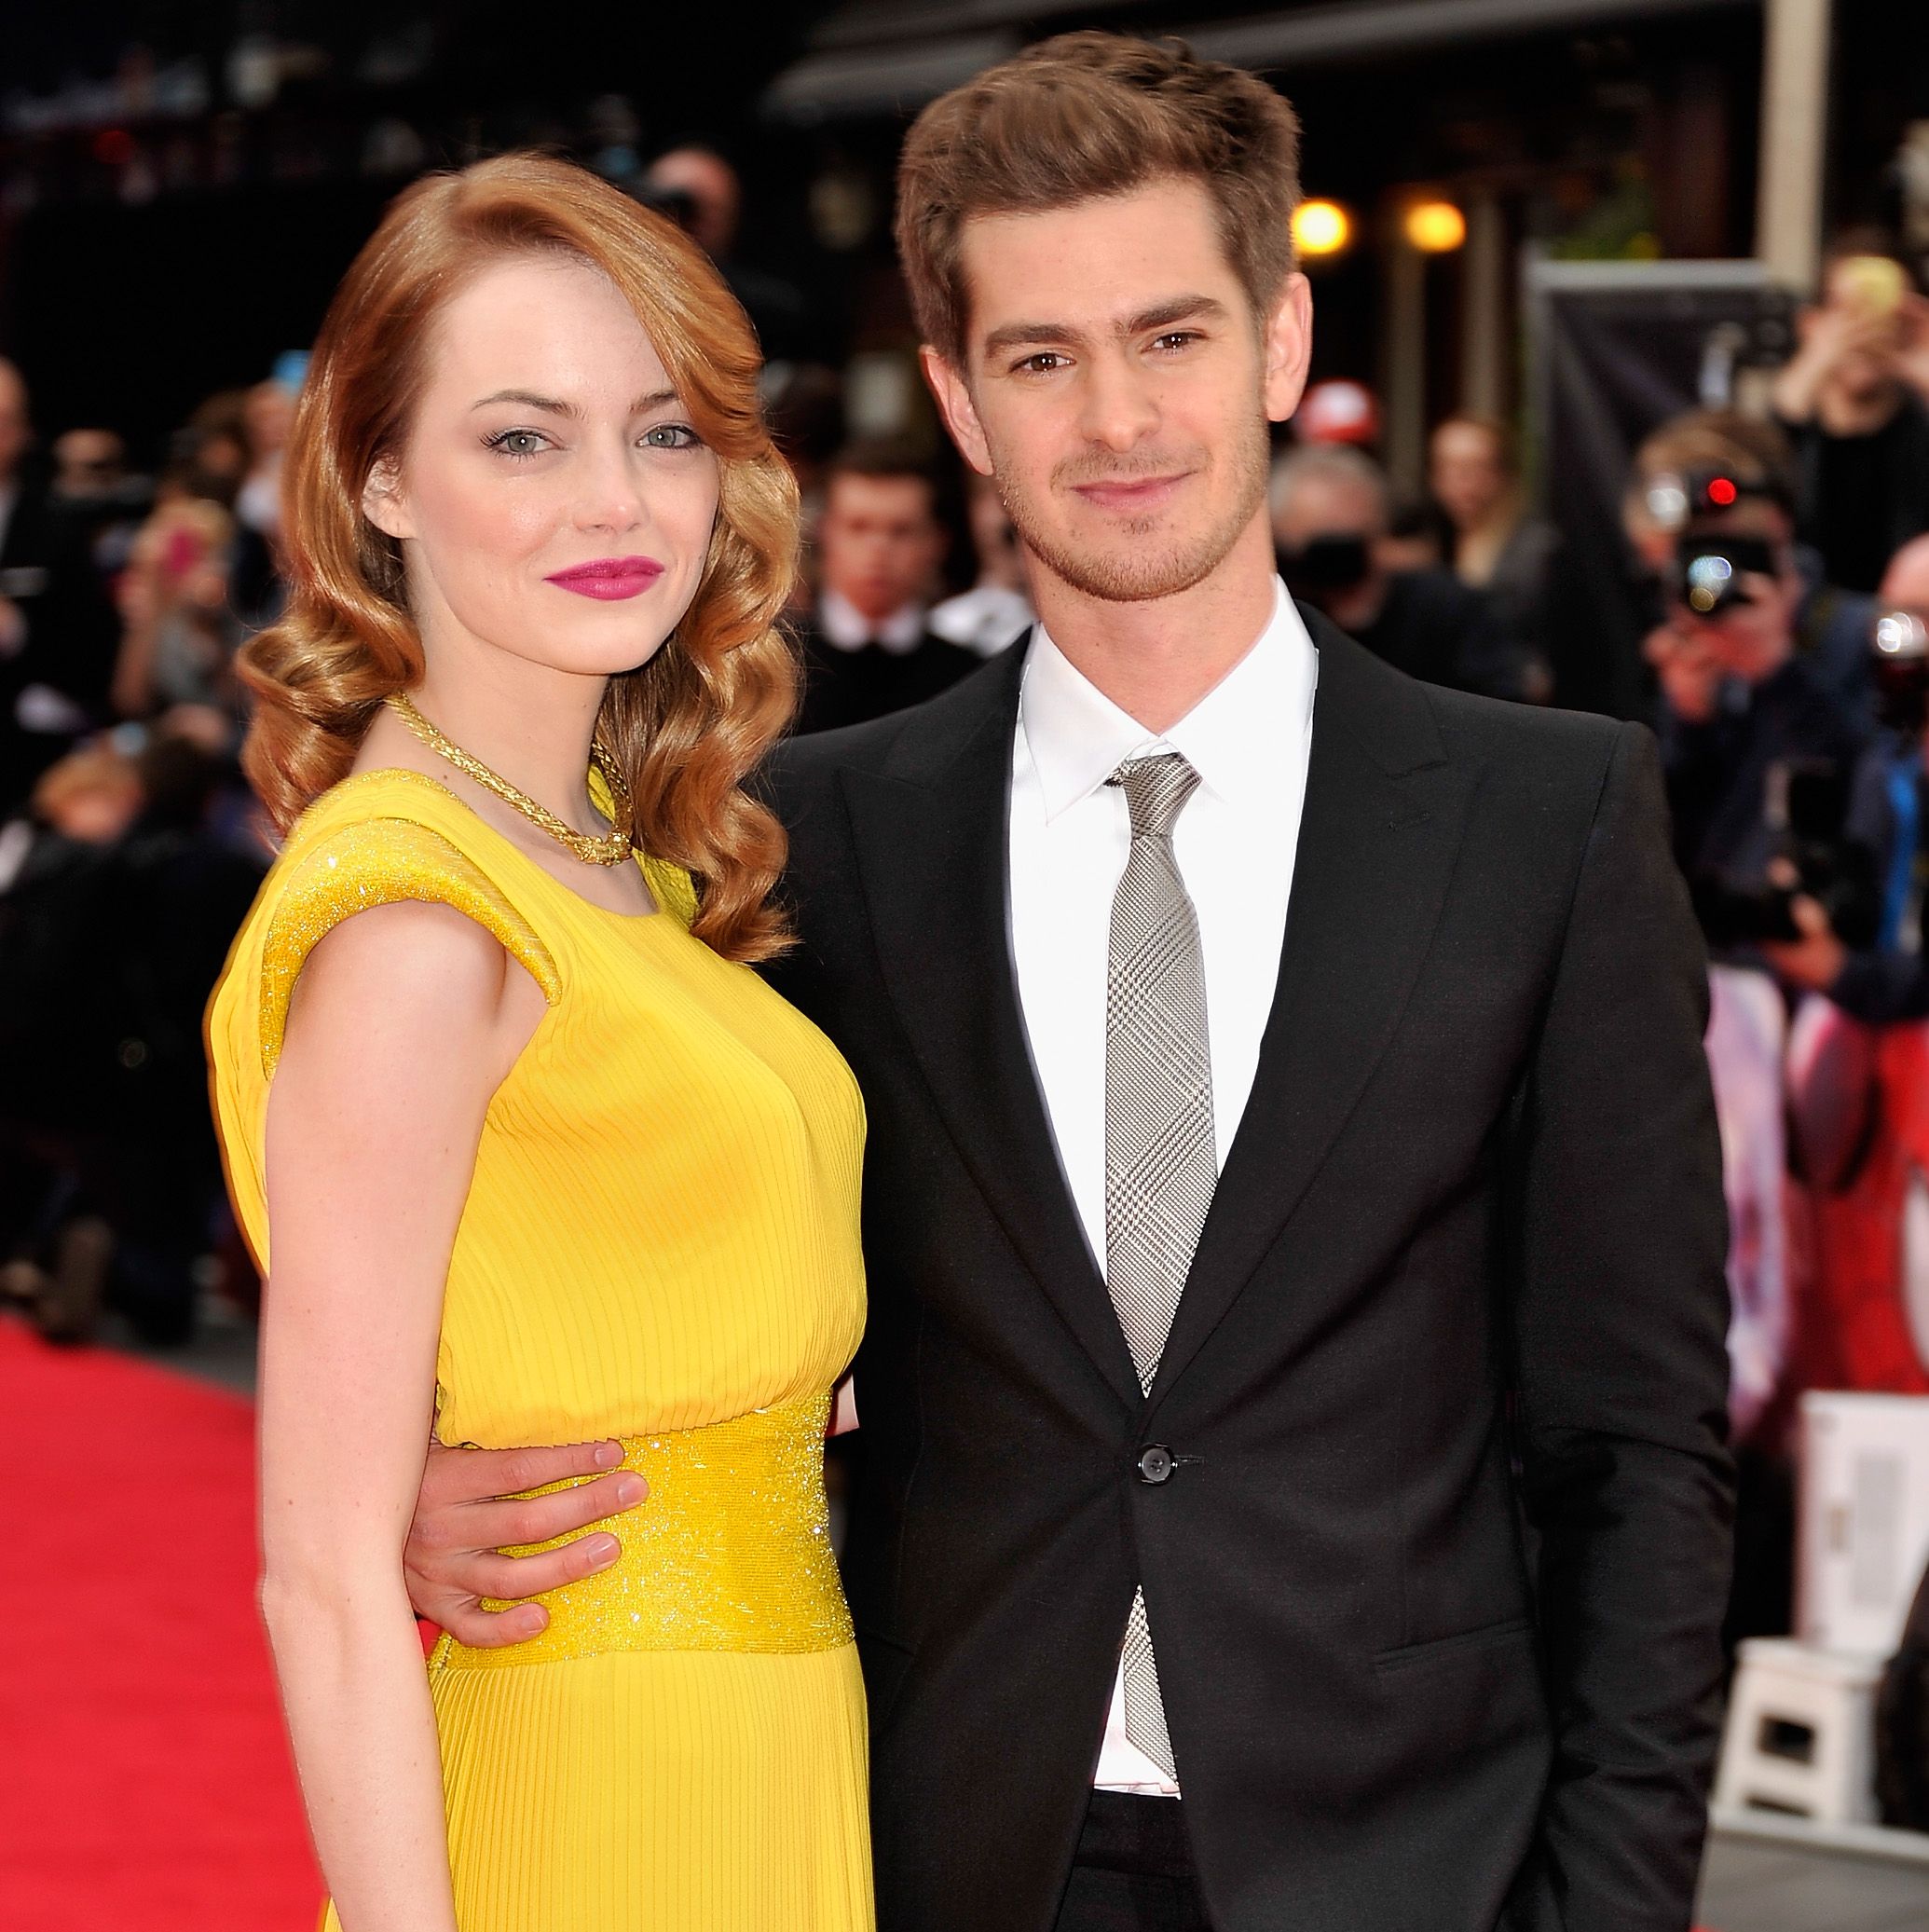 Andrew Garfield Says Emma Stone Called Him Out for Lying About 'Spider-Man'